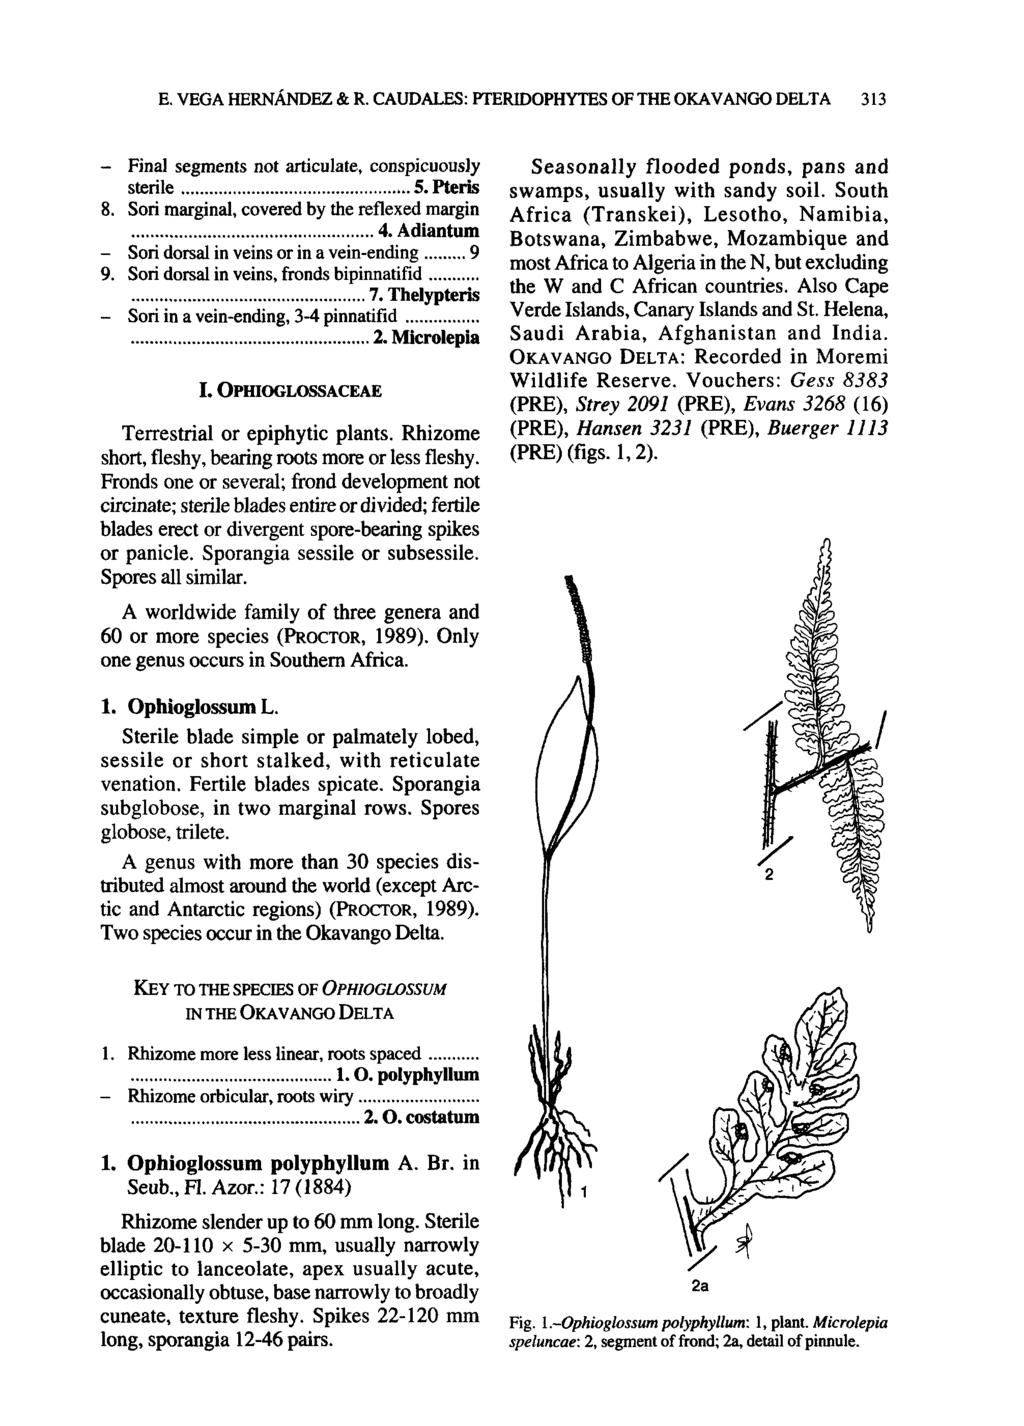 E. VEGA HERNANDEZ & R. CAUDALES: PTERIDOPHYTES OF THE OKAVANGO DELTA 313 - Final segments not articulate, conspicuously sterile 5. Pterls 8. Sori marginal, covered by the reflexed margin 4.